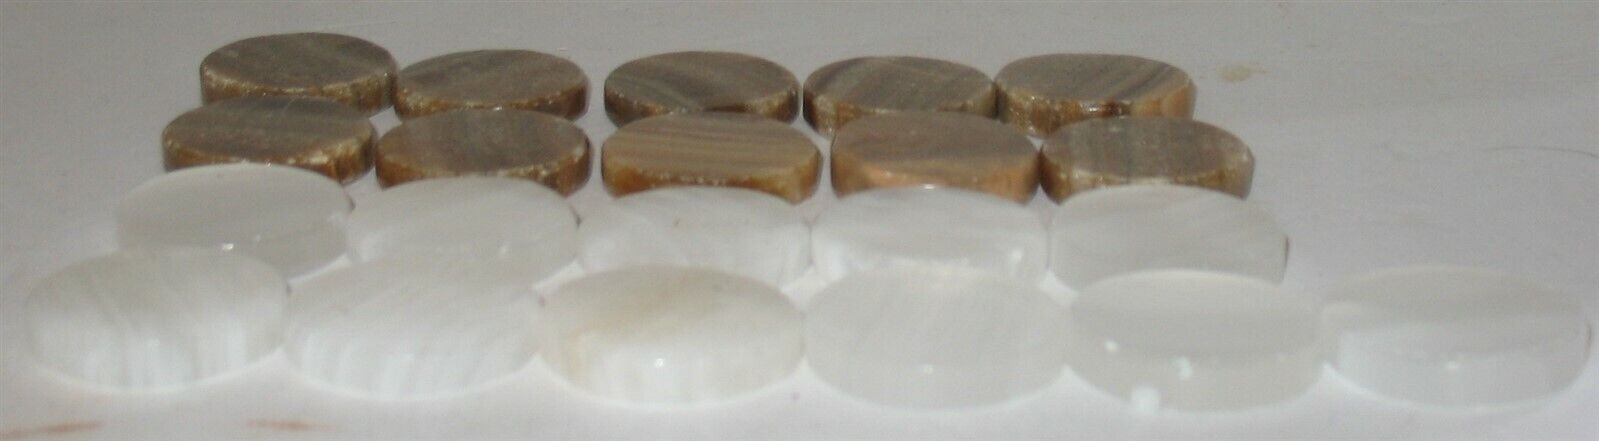 21 Pieces Vintage Brown & White Stone Checkers Replacement Parts Unbranded - фотография #2